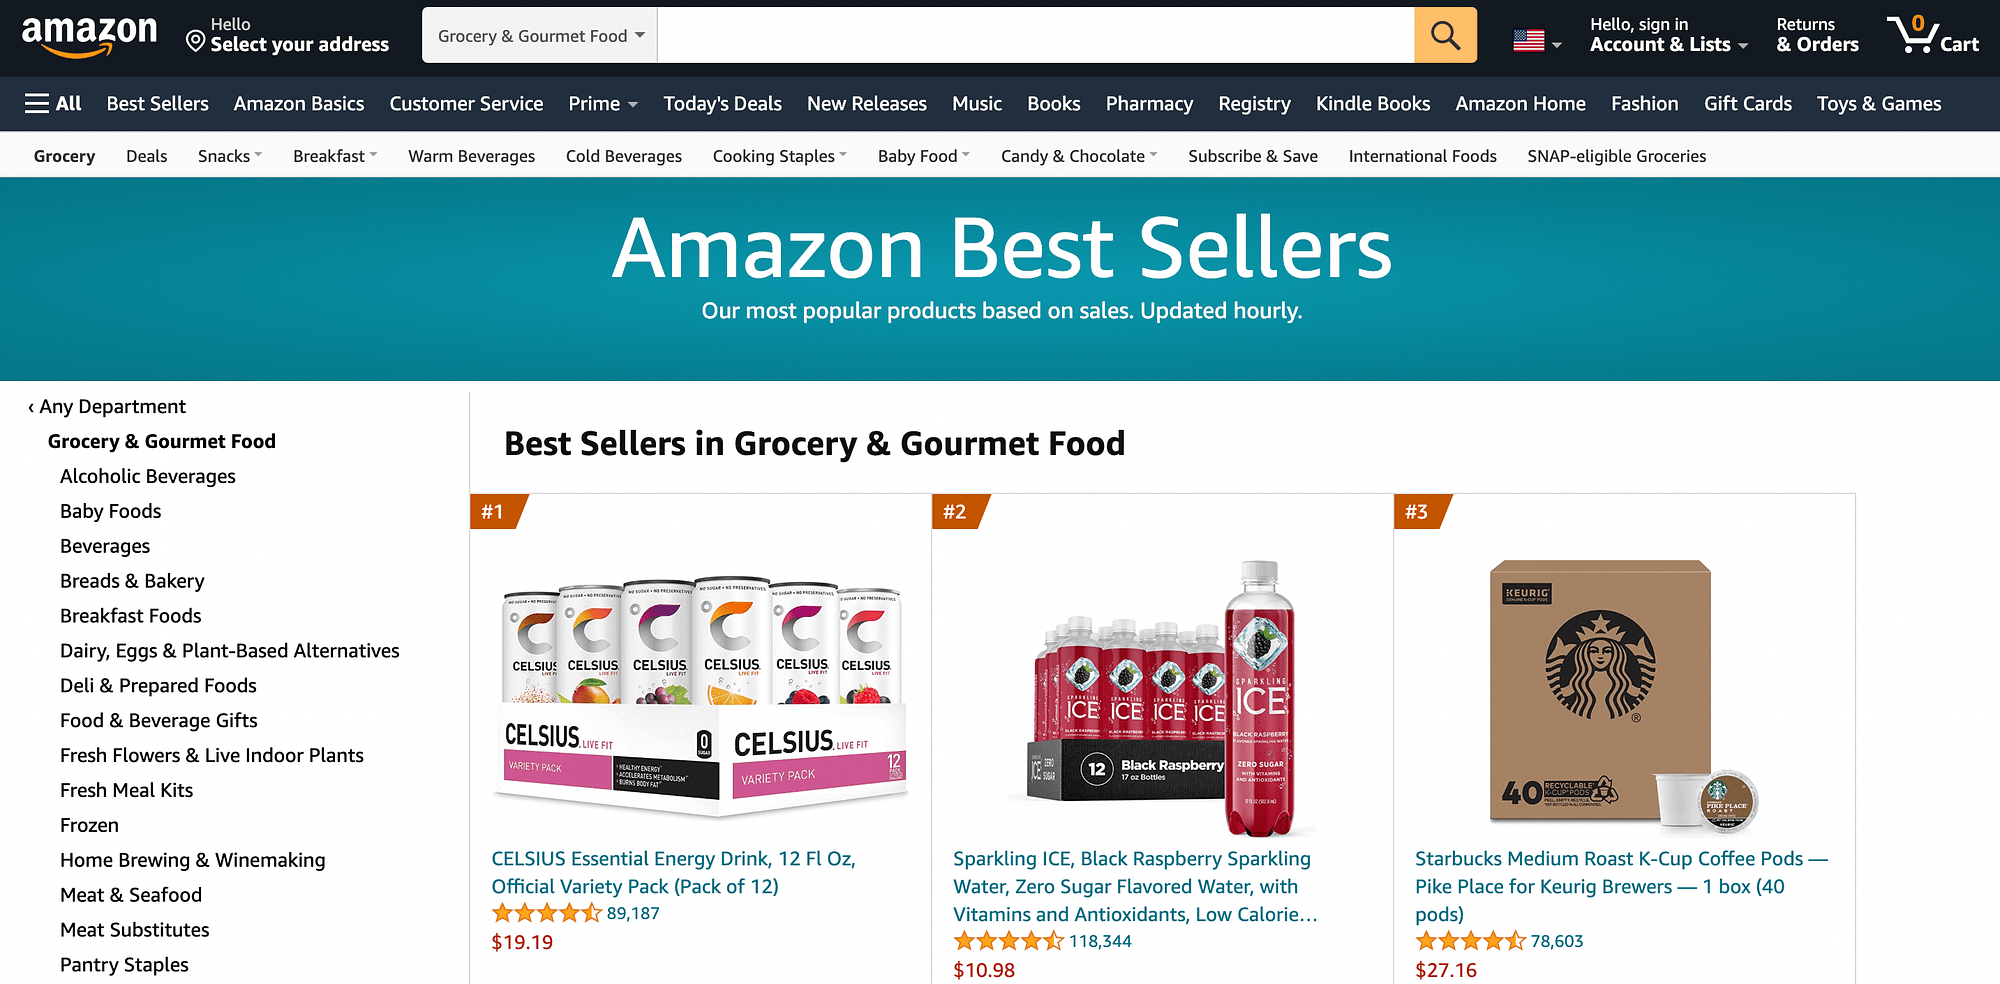 Best-selling Amazon products in the Grocery and Gourmey Food category.